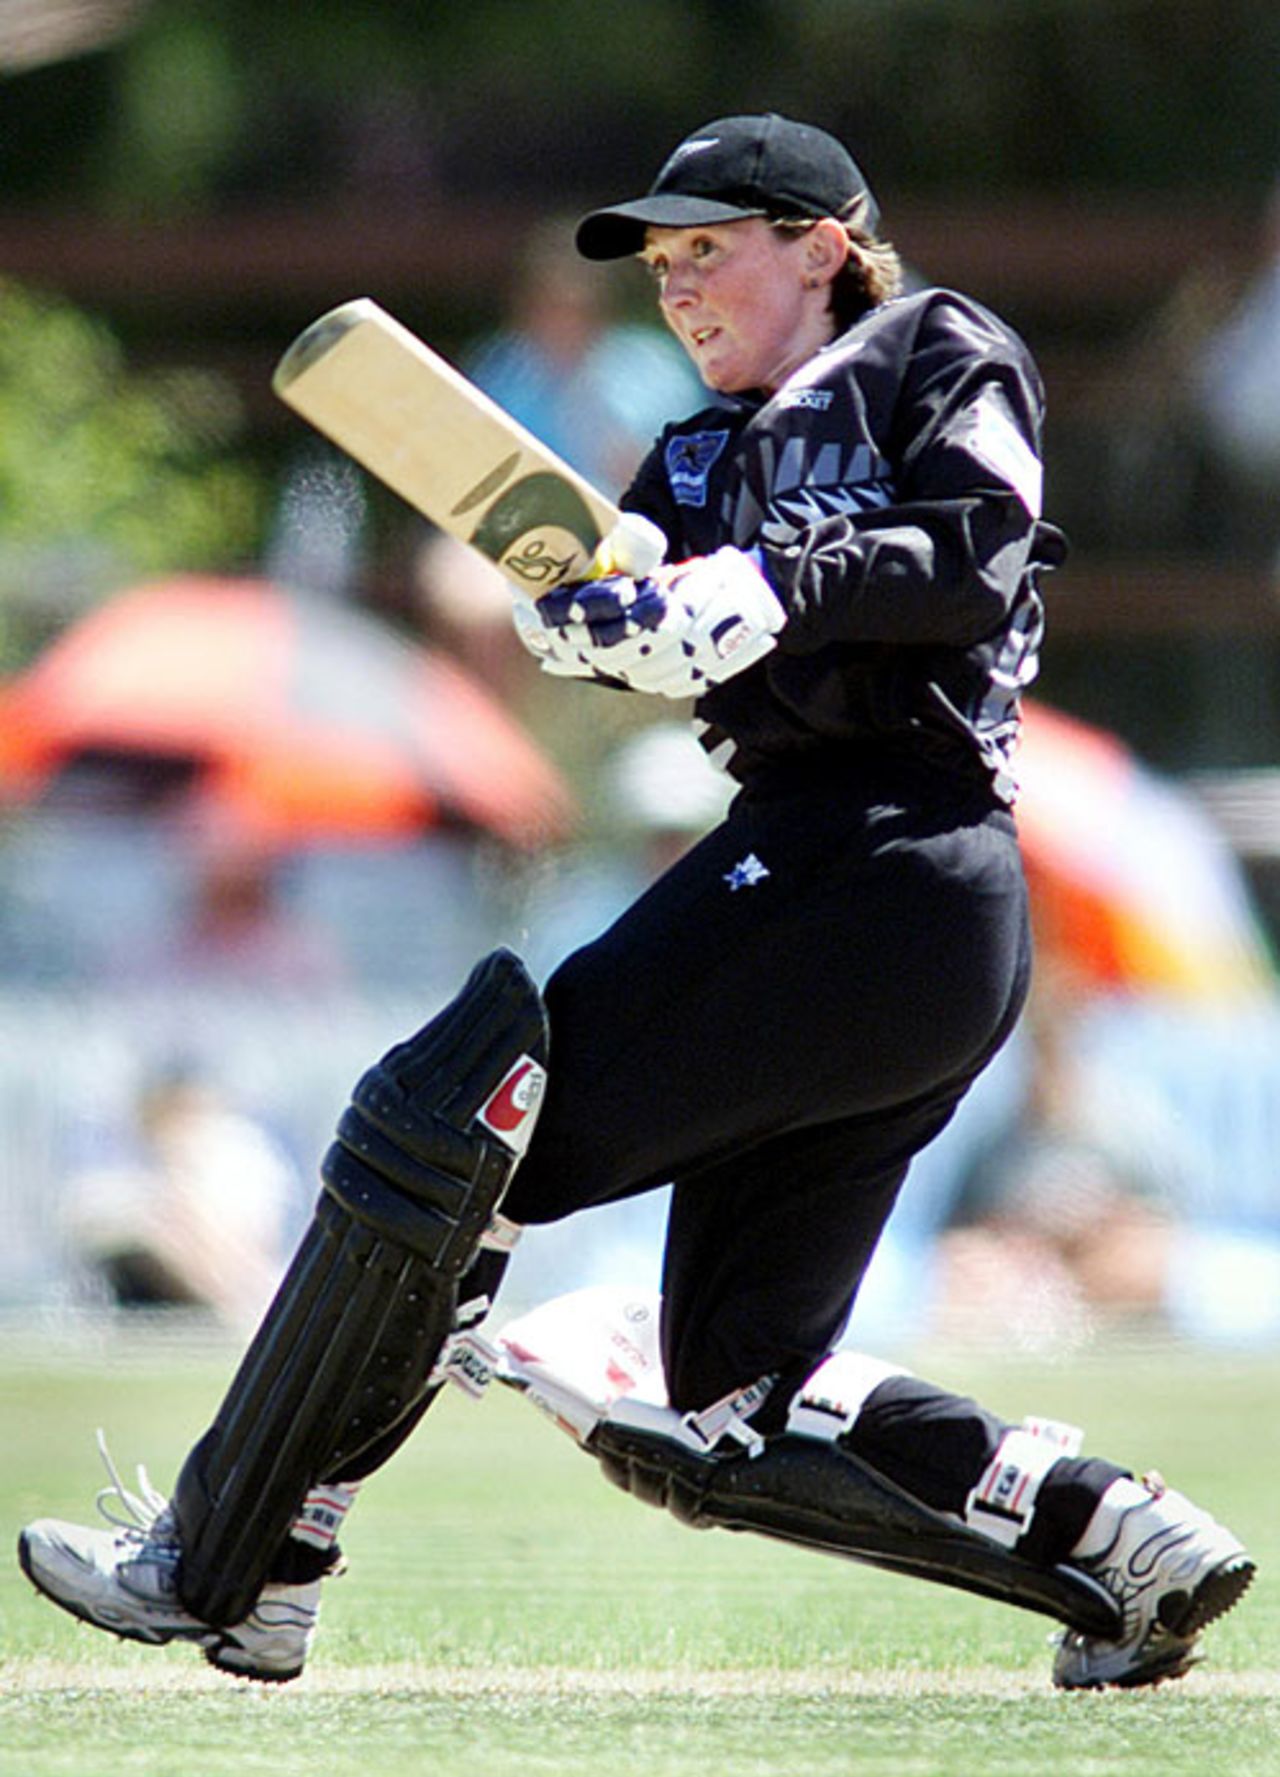 Anna O"Leary hits out during her unbeaten half-century, New Zealand v India, Women's World Cup semi-final, Lincoln, December 20, 2000